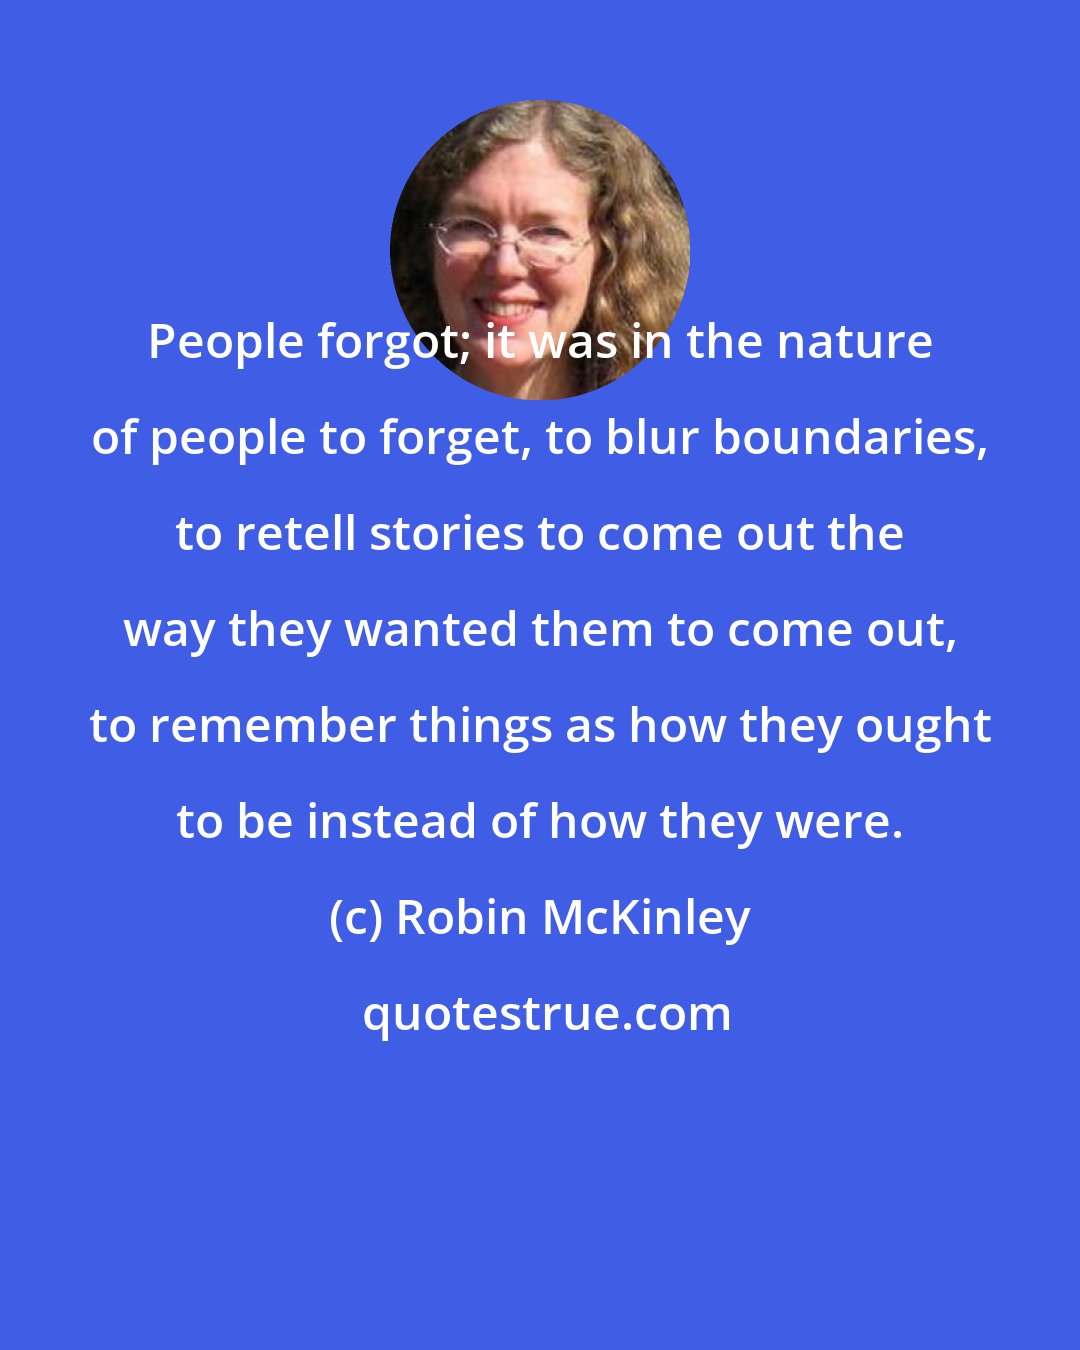 Robin McKinley: People forgot; it was in the nature of people to forget, to blur boundaries, to retell stories to come out the way they wanted them to come out, to remember things as how they ought to be instead of how they were.